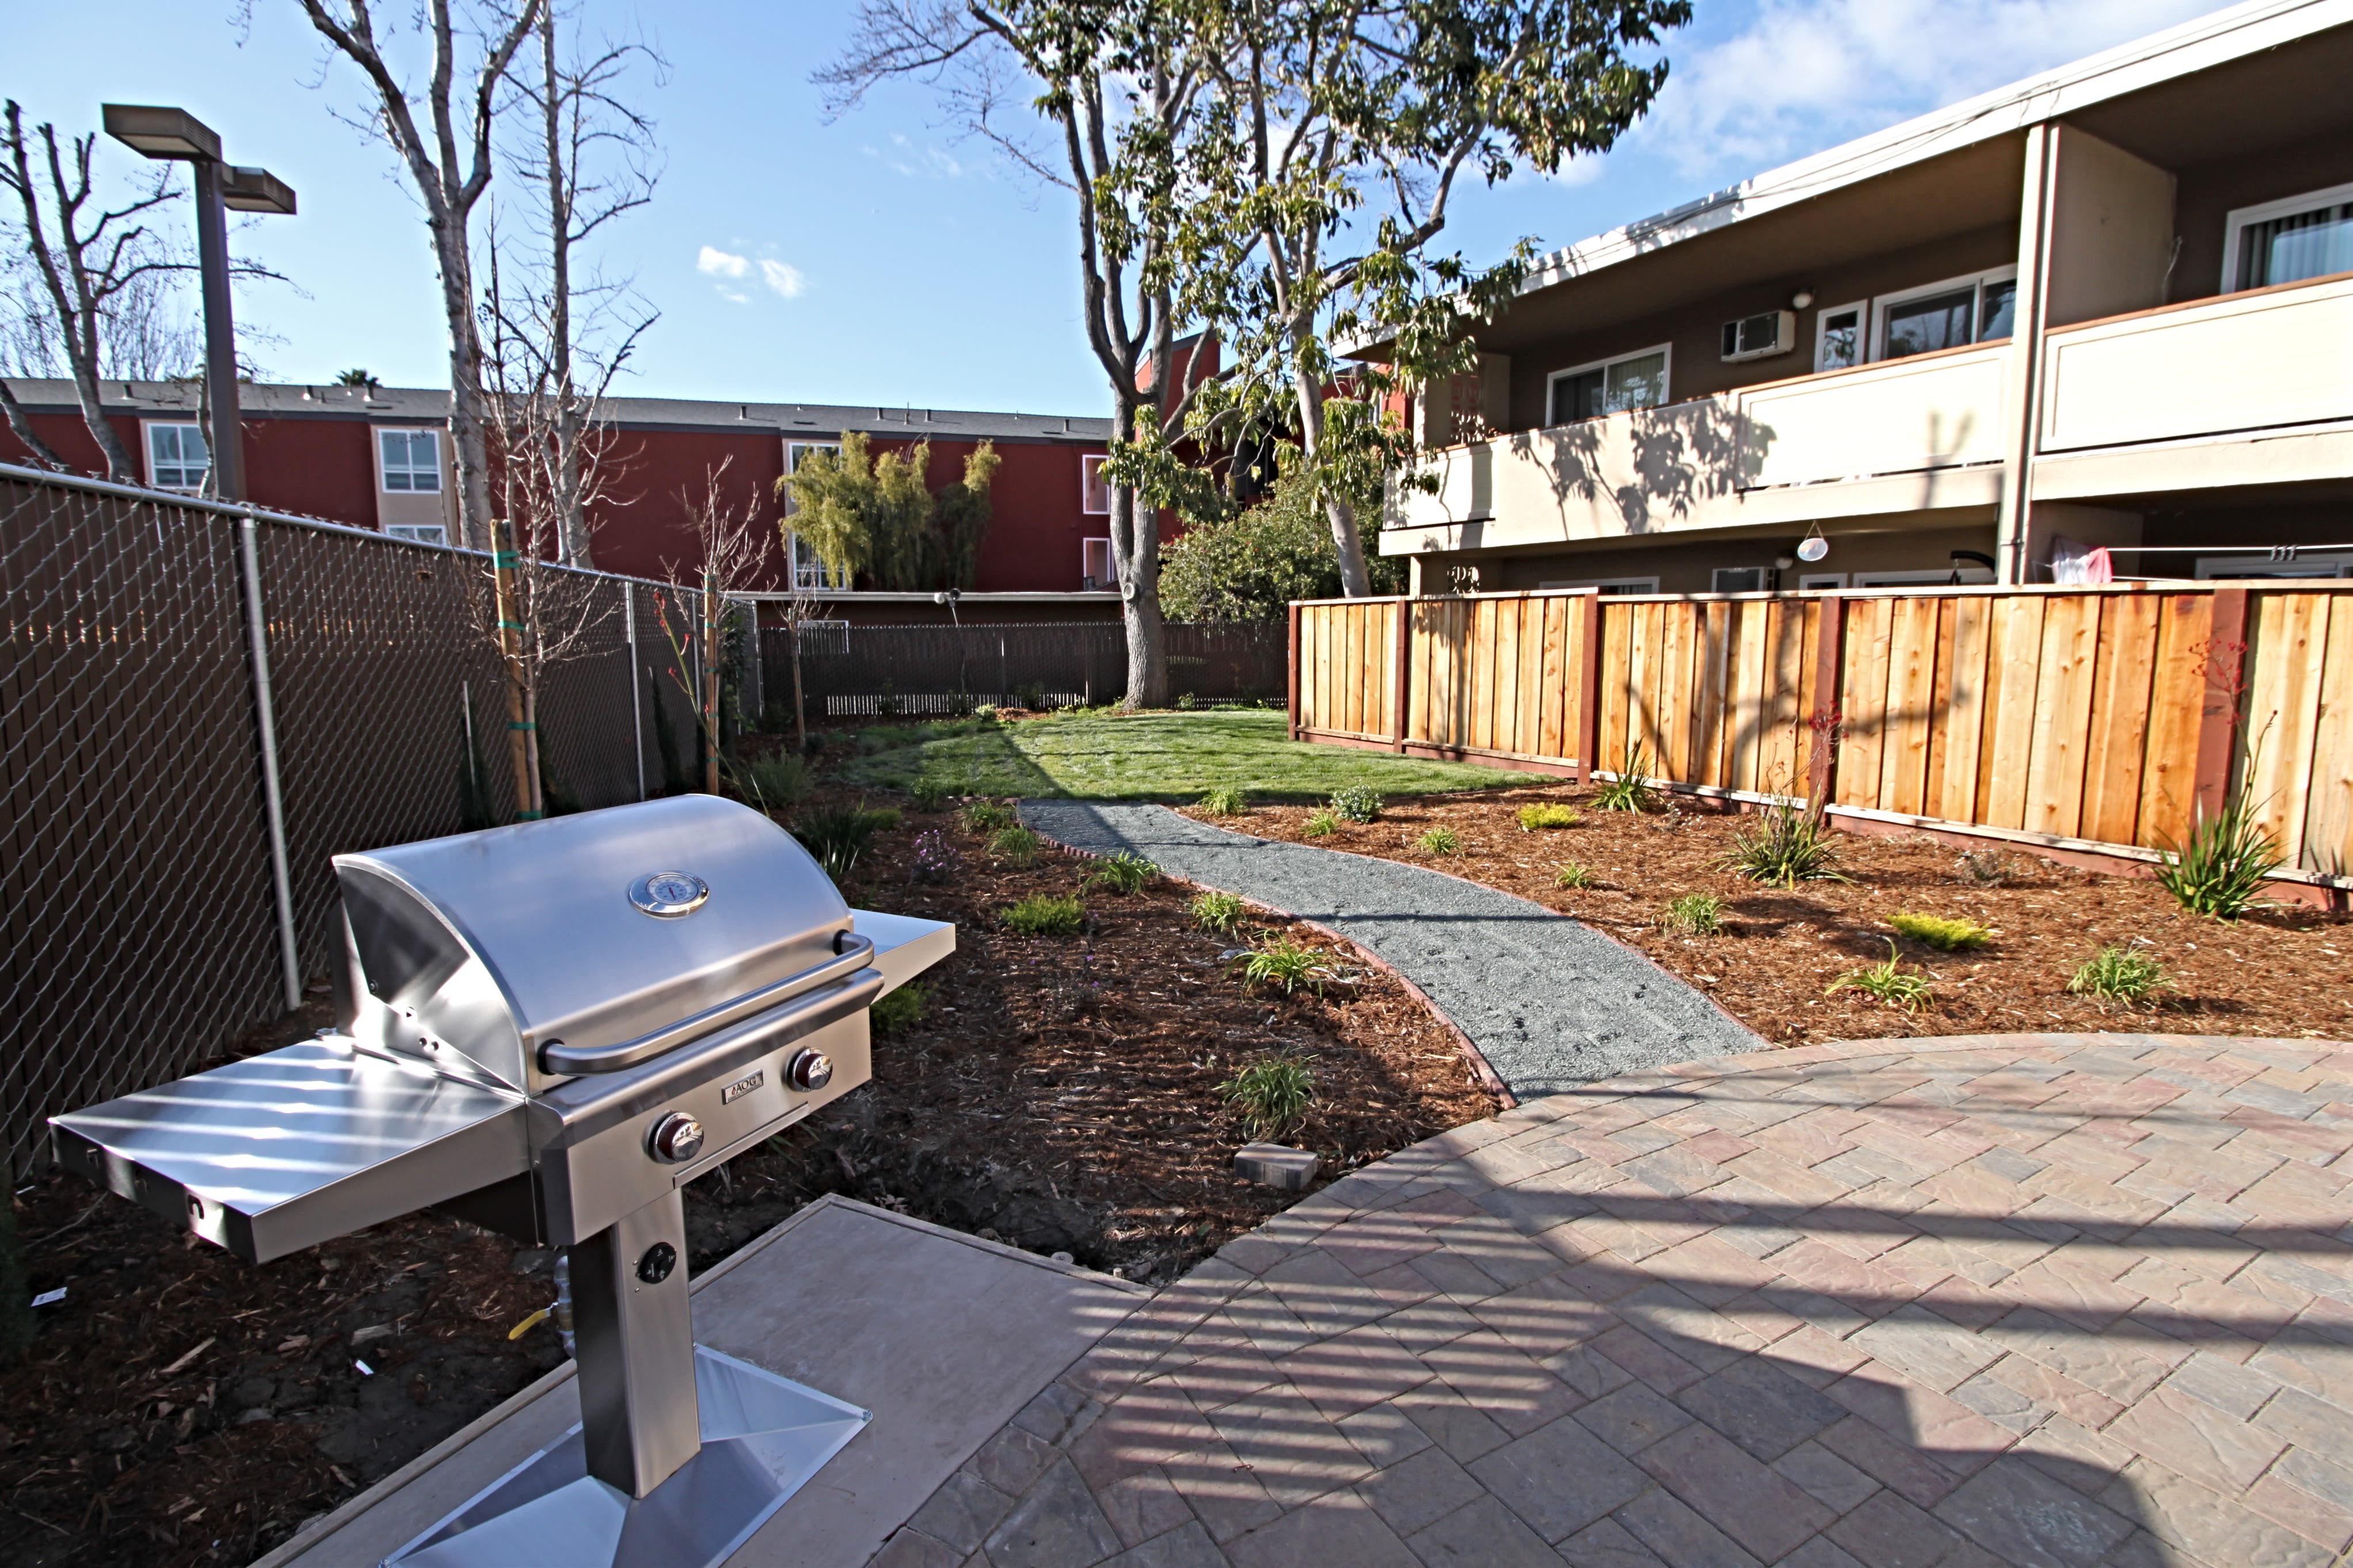 Pristine grills in the courtyard at Coronado Apartments in Fremont, California